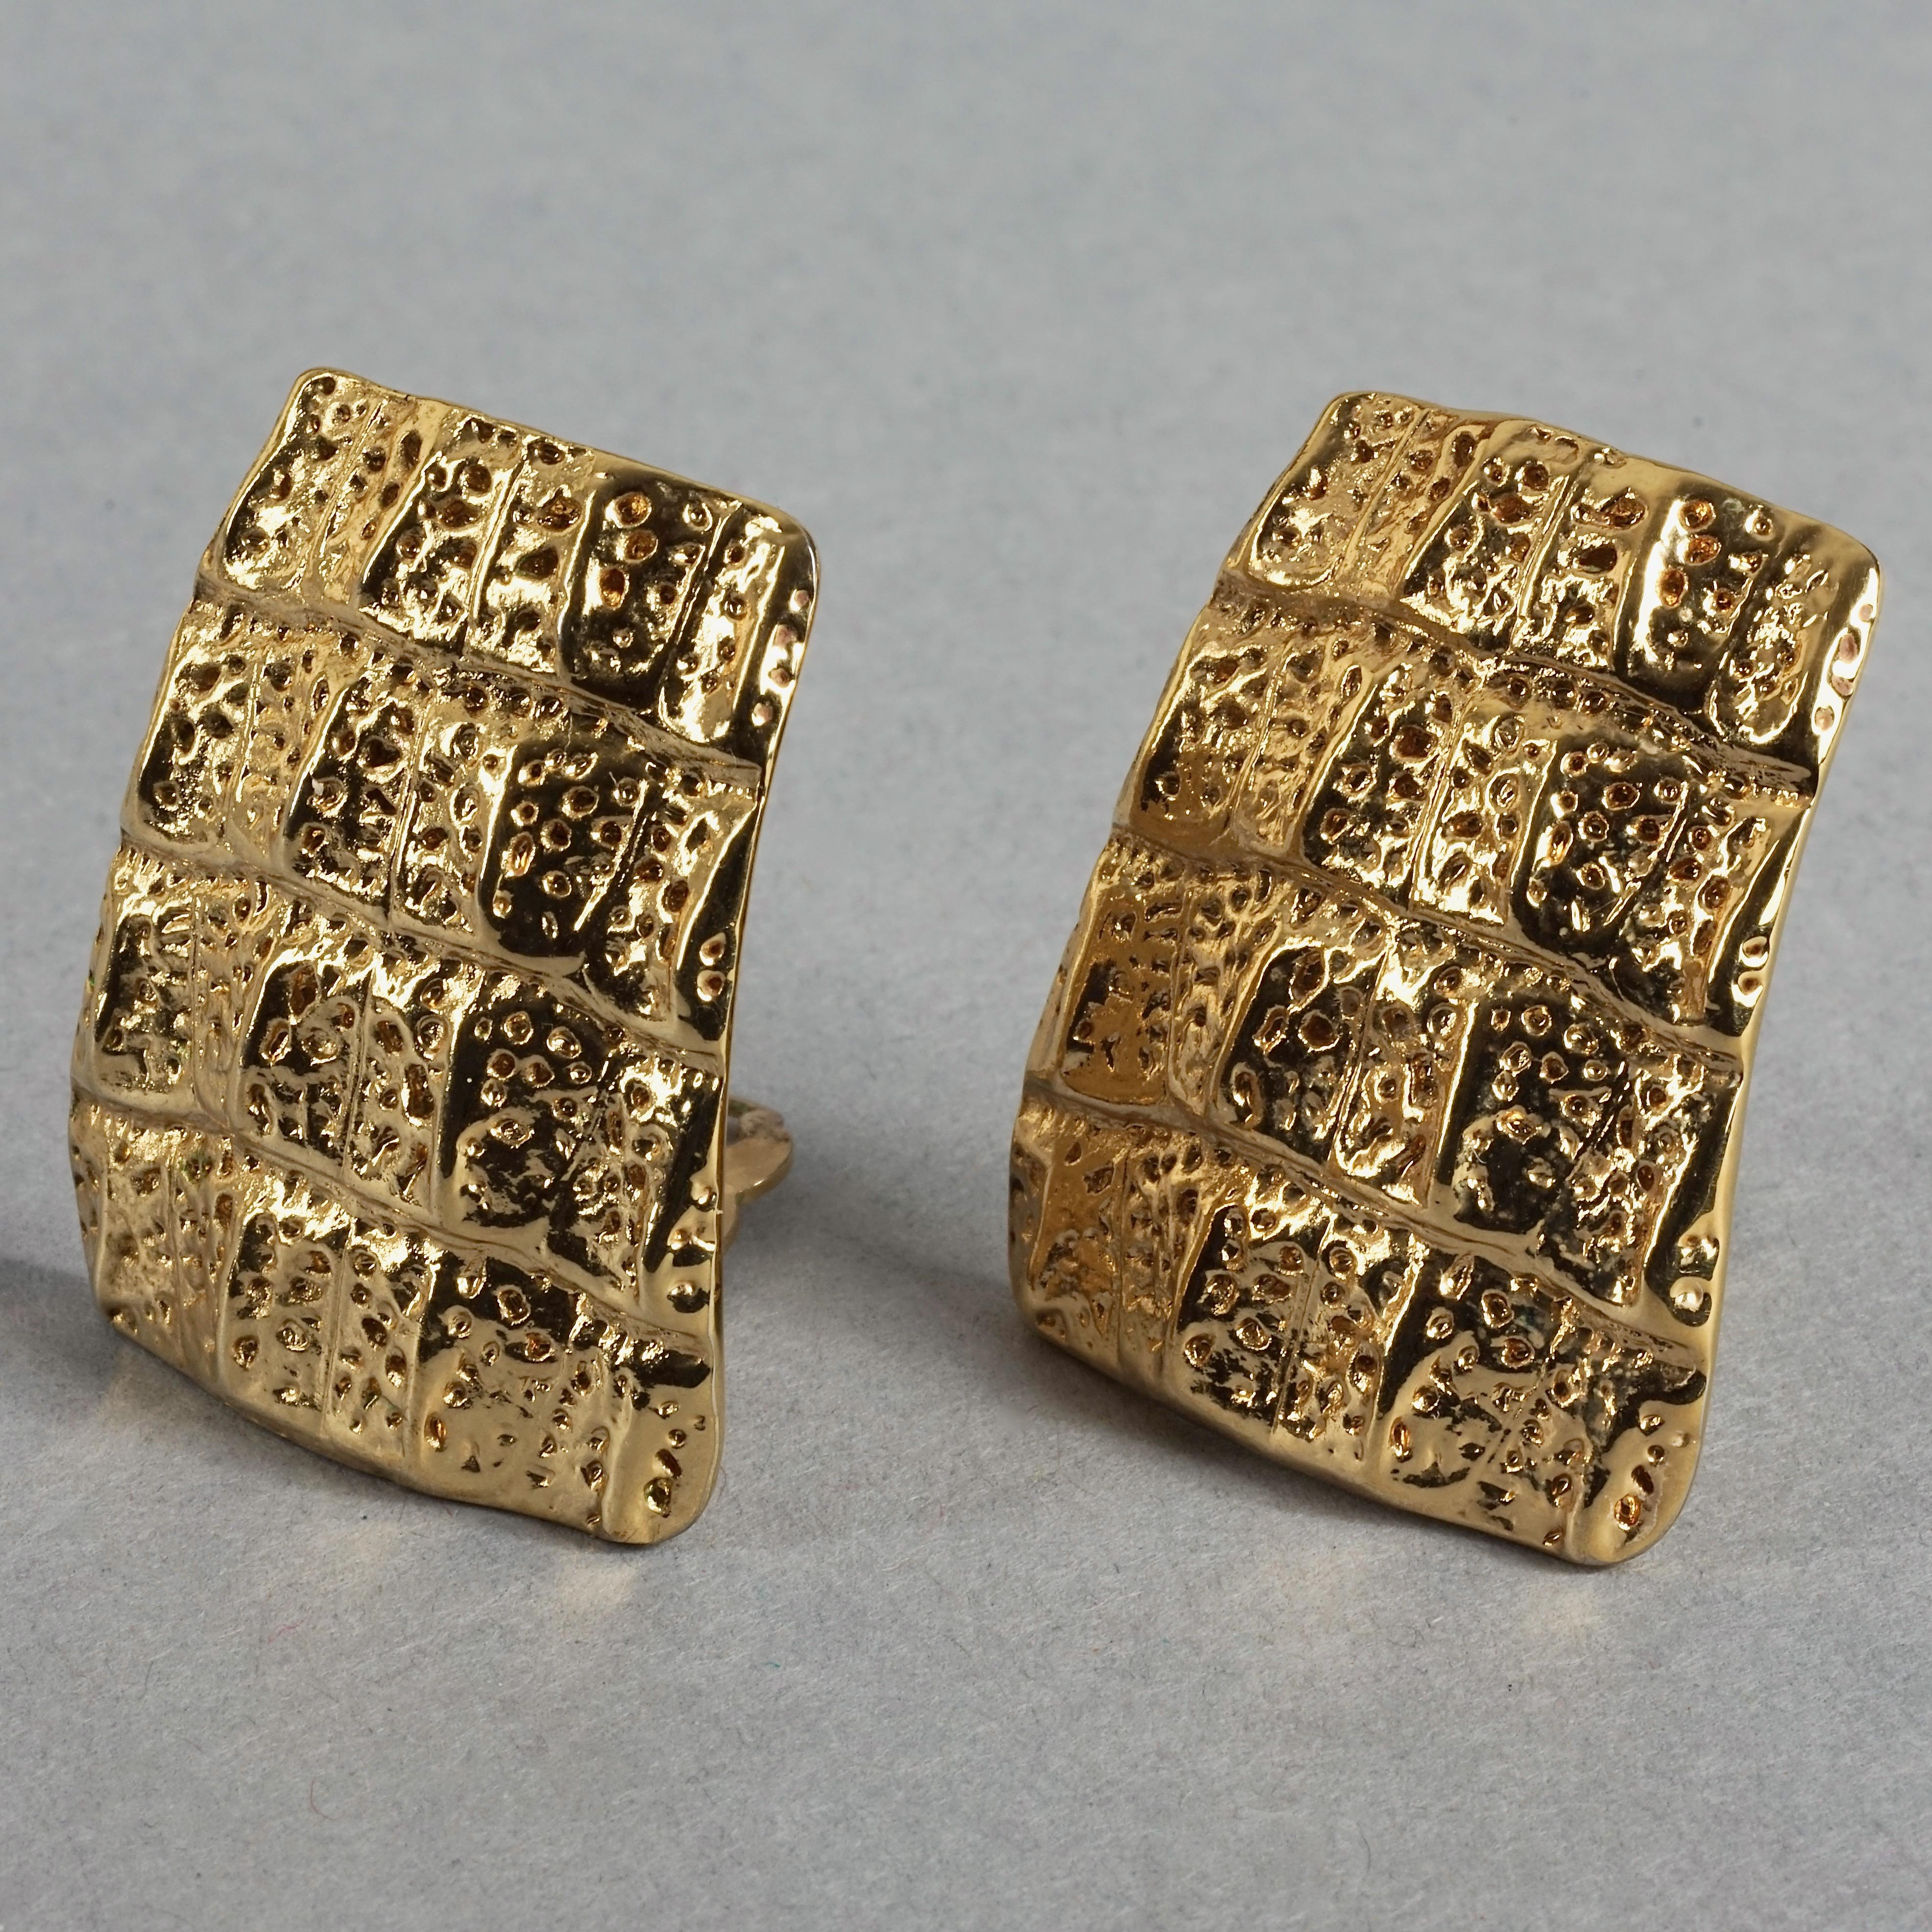 Vintage YVES SAINT LAURENT Ysl Crocodile Pattern Earrings In Excellent Condition For Sale In Kingersheim, Alsace